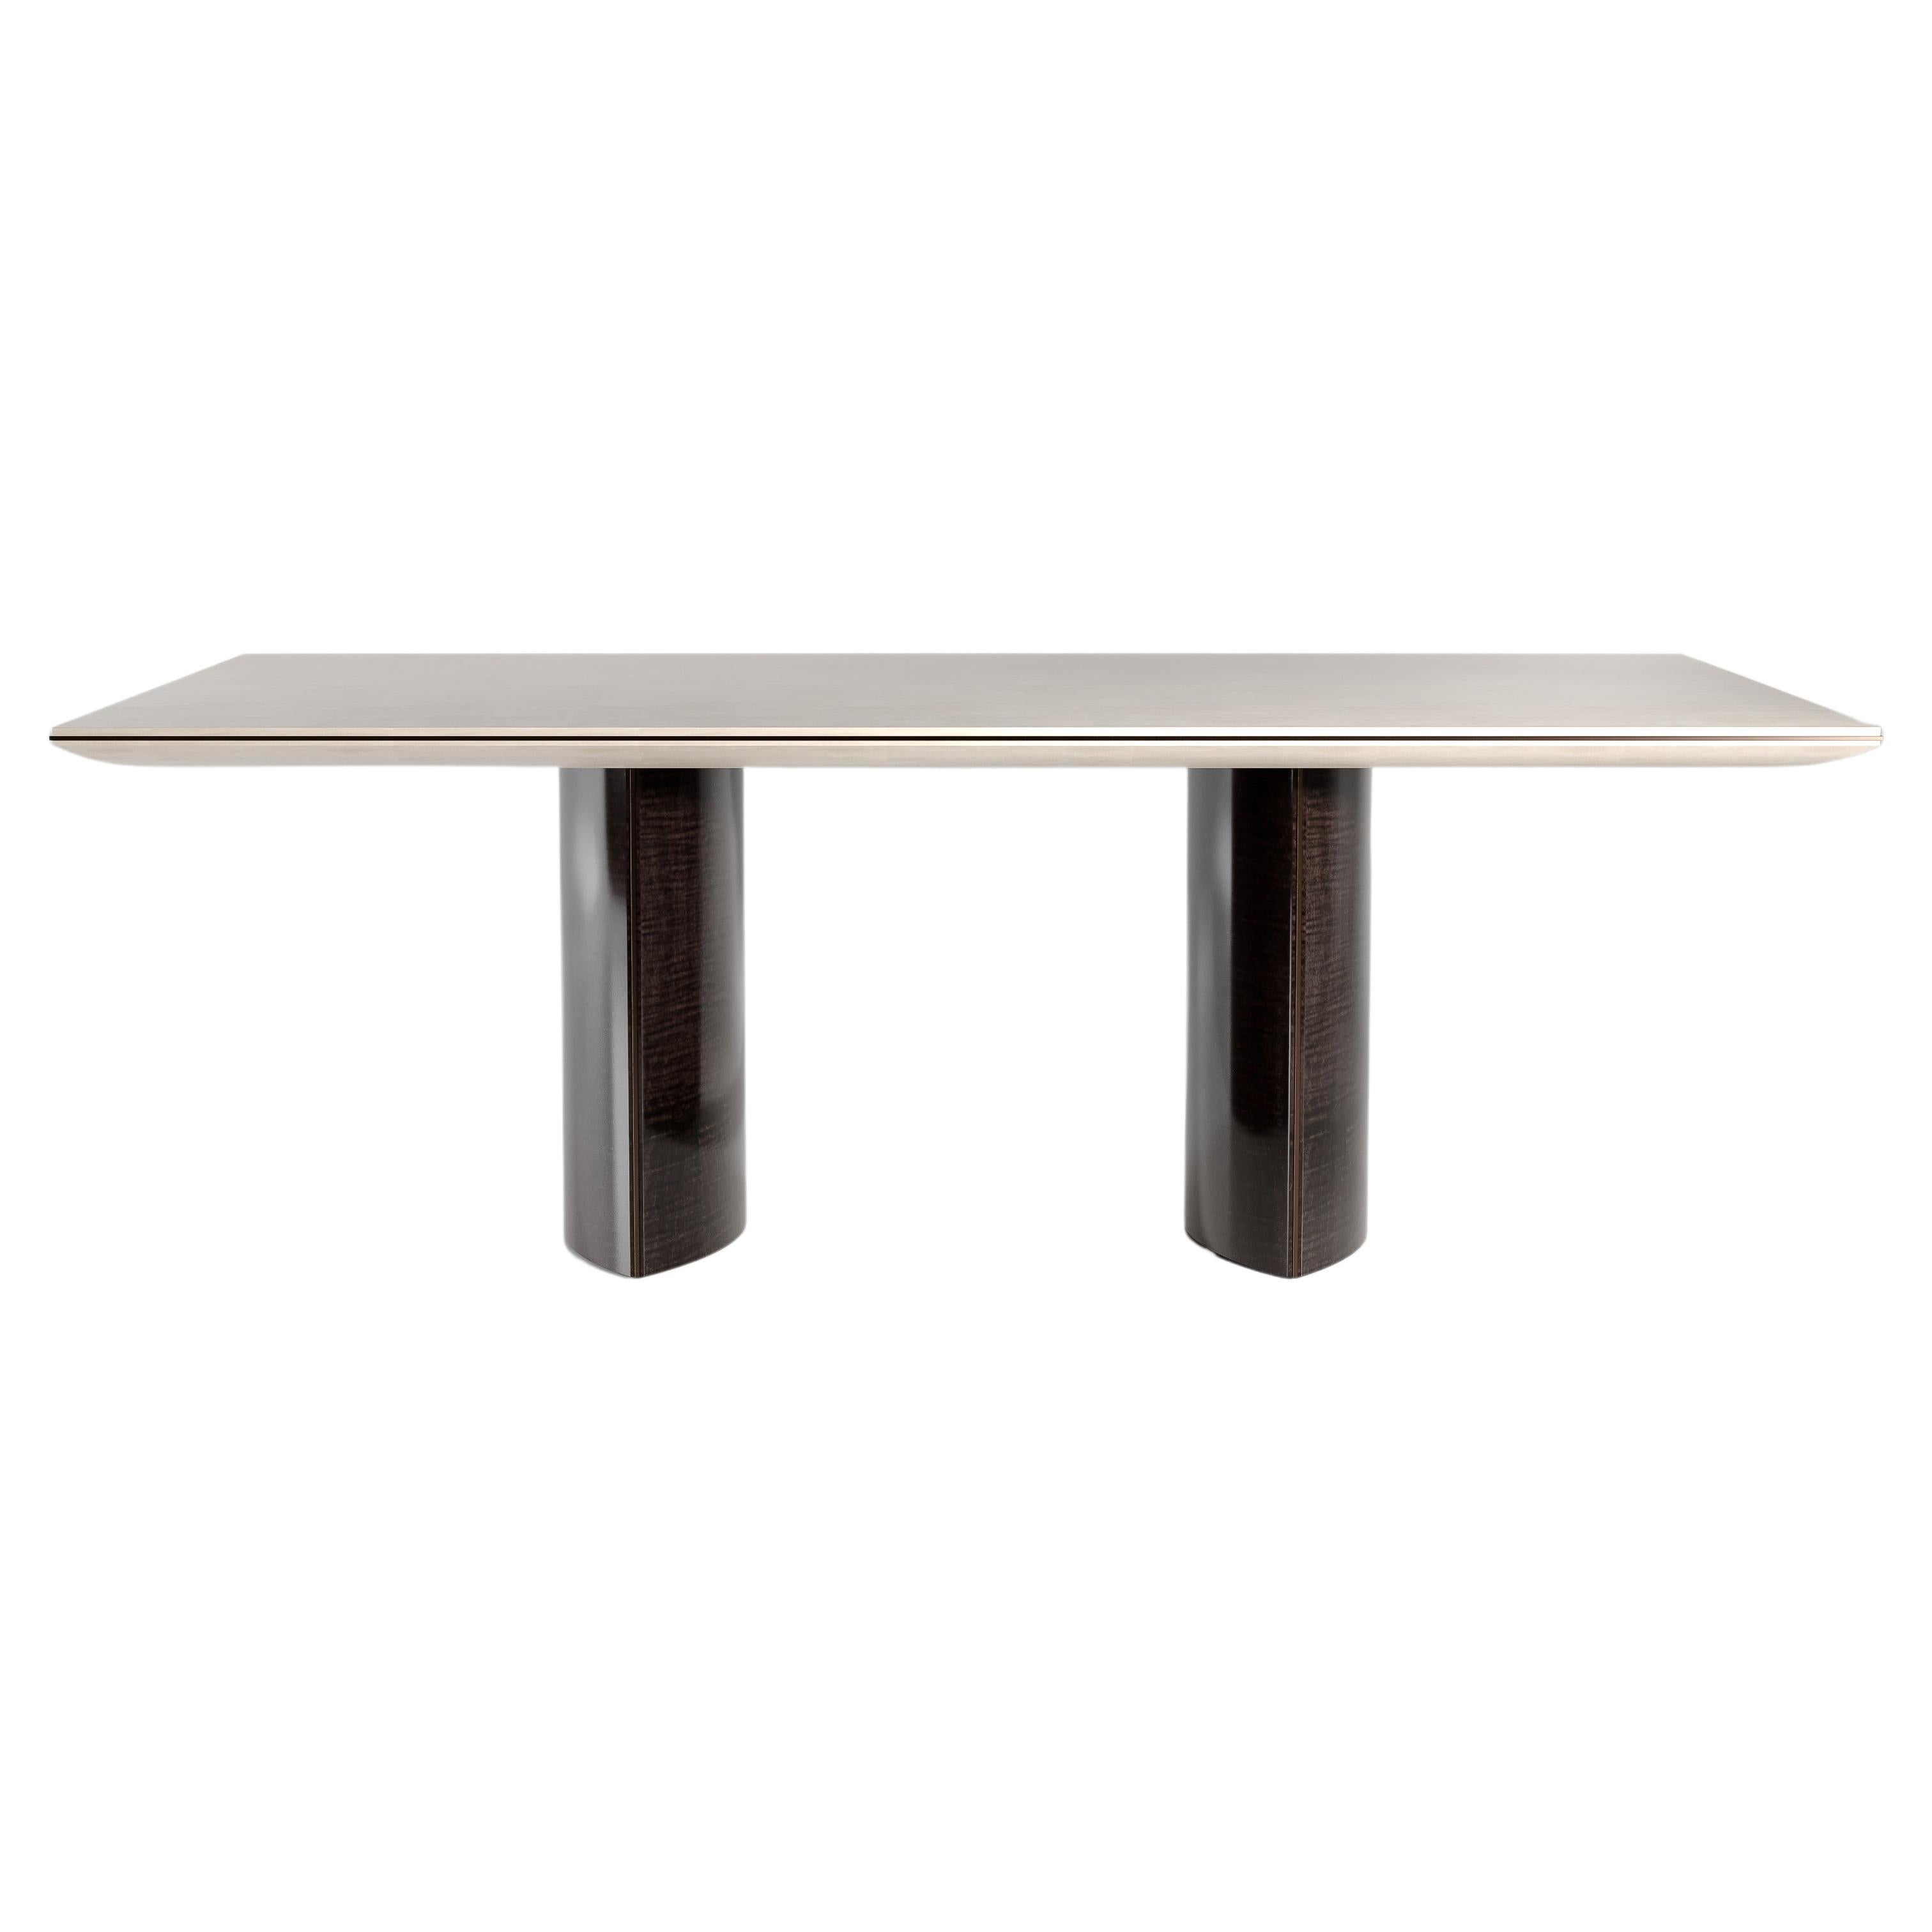 Two-Tone Sycamore Wood Modern Dining Table with Pedestals For Sale